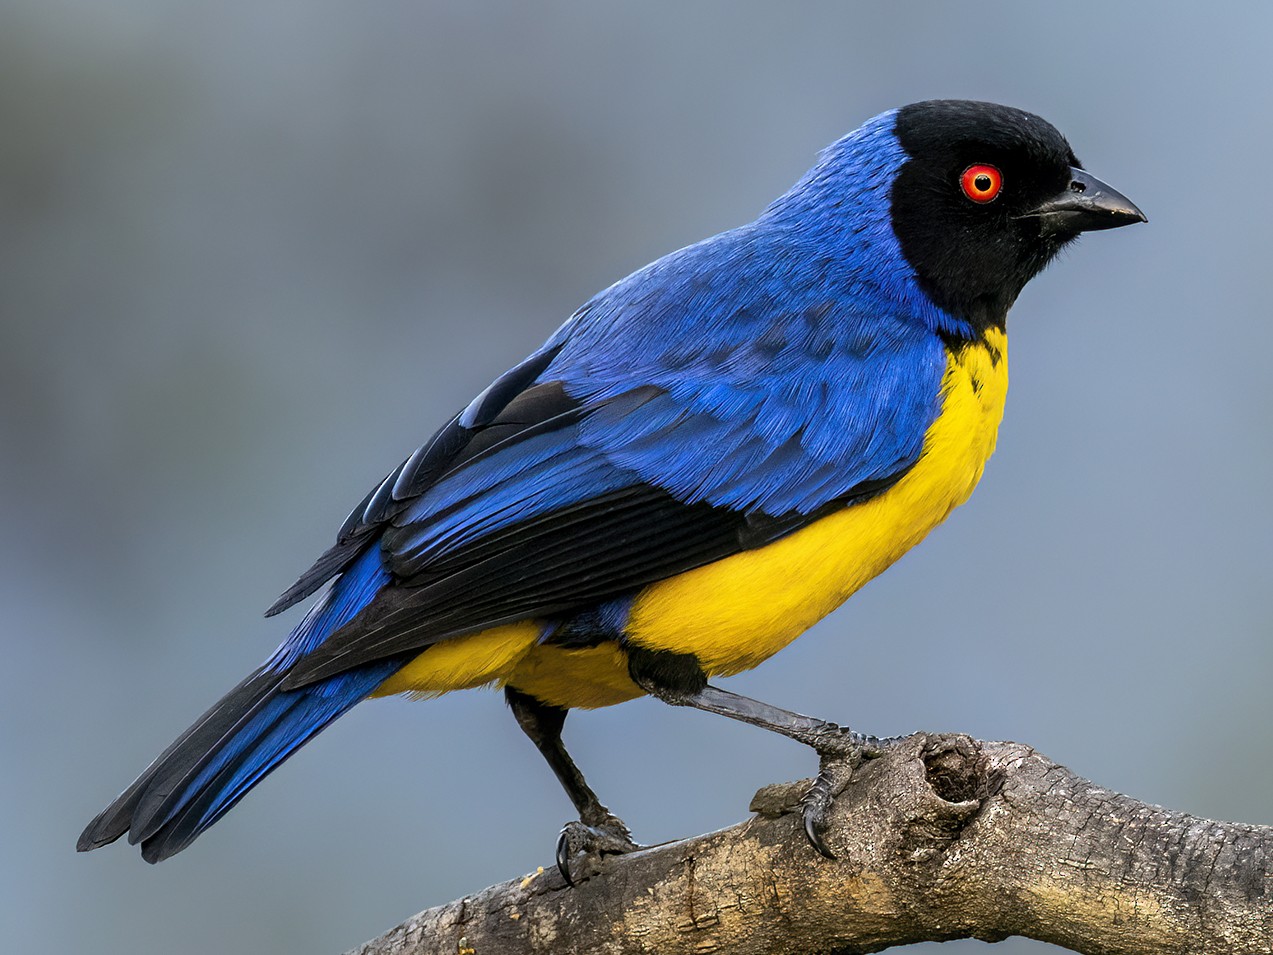 Hooded Mountain Tanager - eBird